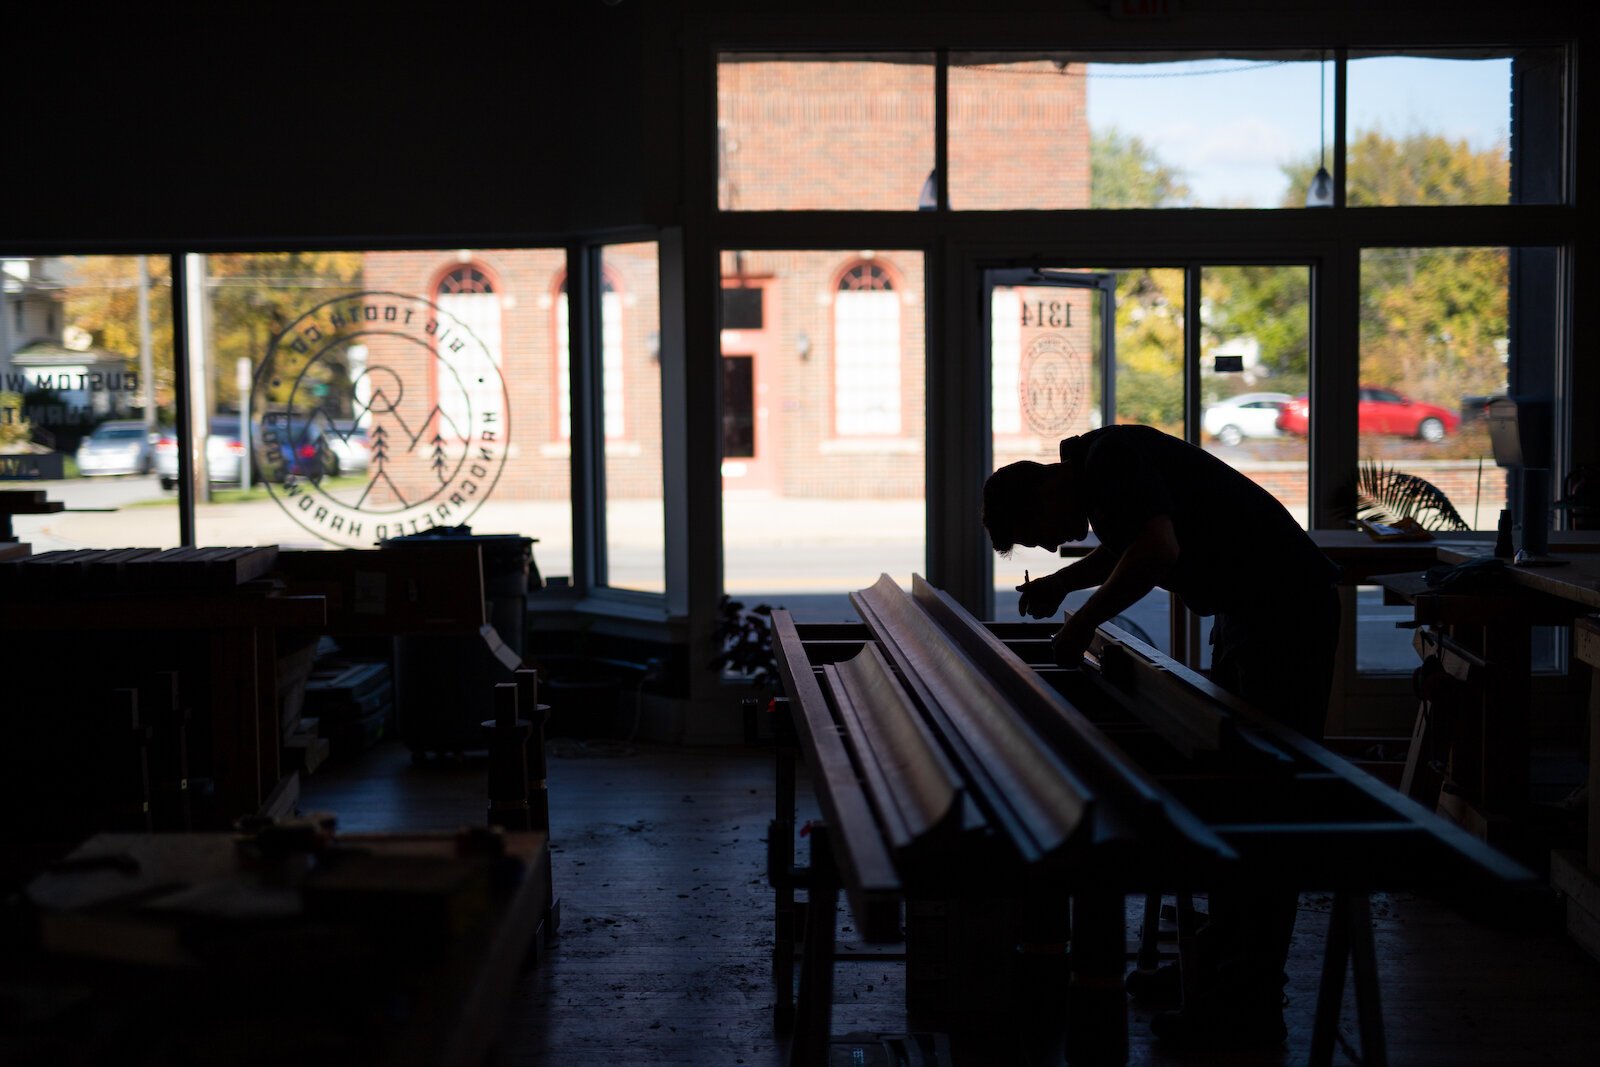 Nicholas Cramer, Owner of Big Tooth Co., is making furniture, like conference tables, for the future Electric Works campus, using felled trees from the construction site.